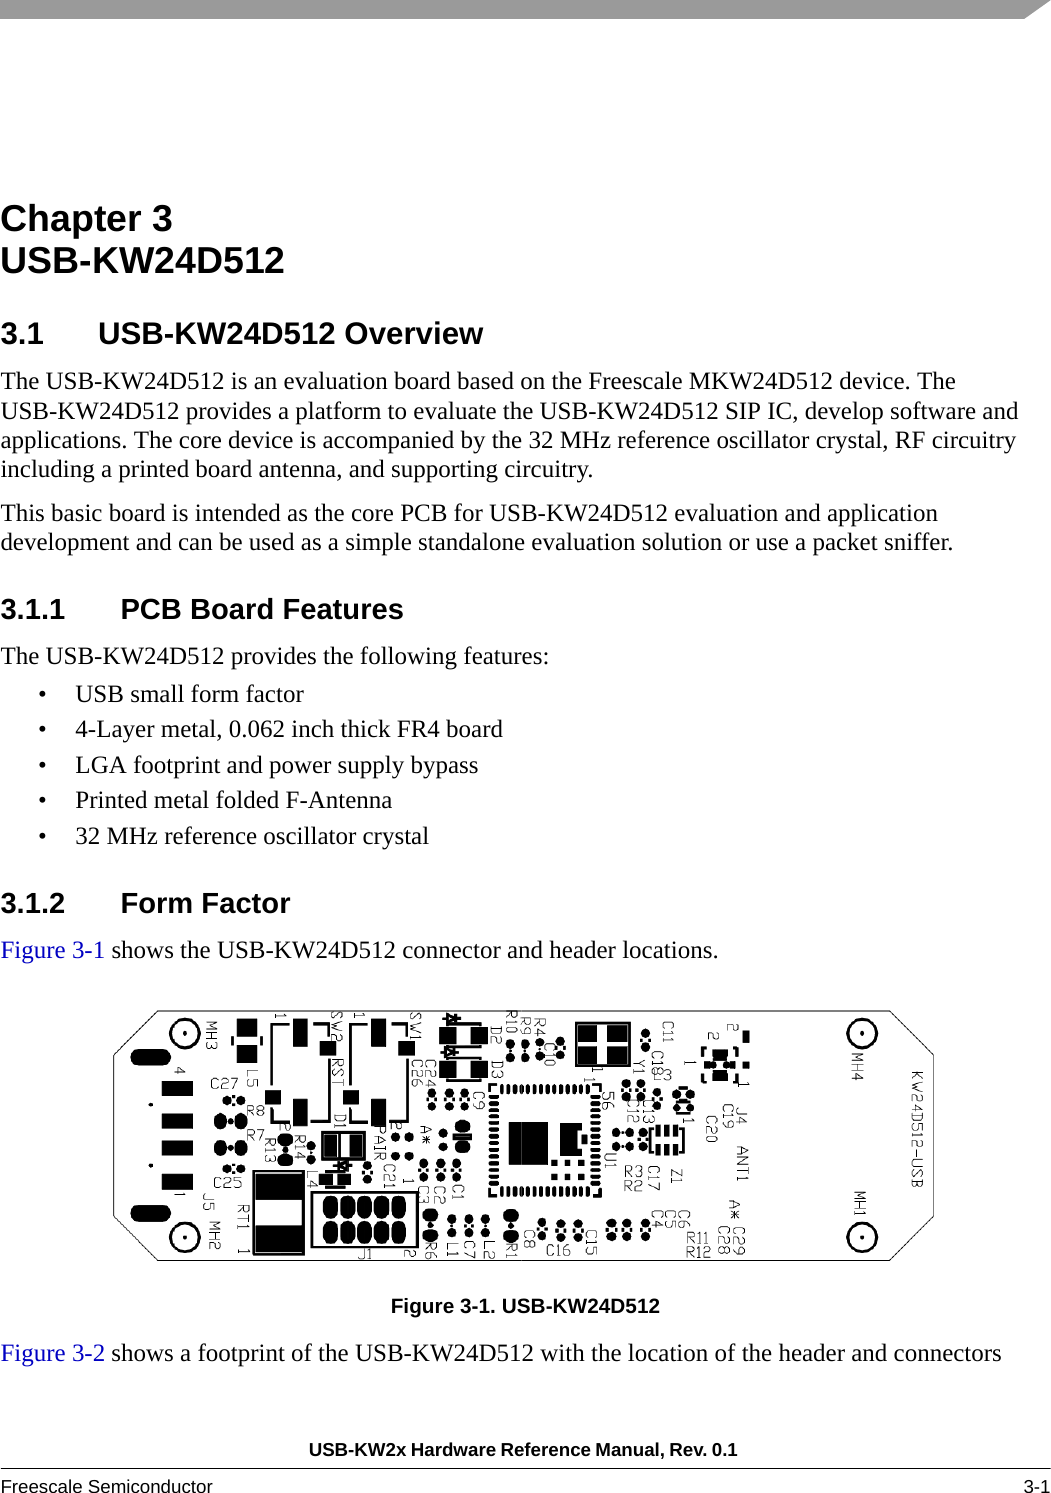 USB-KW2x Hardware Reference Manual, Rev. 0.1 Freescale Semiconductor 3-1Chapter 3  USB-KW24D5123.1 USB-KW24D512 OverviewThe USB-KW24D512 is an evaluation board based on the Freescale MKW24D512 device. The USB-KW24D512 provides a platform to evaluate the USB-KW24D512 SIP IC, develop software and applications. The core device is accompanied by the 32 MHz reference oscillator crystal, RF circuitry including a printed board antenna, and supporting circuitry.This basic board is intended as the core PCB for USB-KW24D512 evaluation and application development and can be used as a simple standalone evaluation solution or use a packet sniffer.3.1.1 PCB Board FeaturesThe USB-KW24D512 provides the following features:• USB small form factor • 4-Layer metal, 0.062 inch thick FR4 board• LGA footprint and power supply bypass• Printed metal folded F-Antenna• 32 MHz reference oscillator crystal3.1.2 Form FactorFigure 3-1 shows the USB-KW24D512 connector and header locations.Figure 3-1. USB-KW24D512 Figure 3-2 shows a footprint of the USB-KW24D512 with the location of the header and connectors